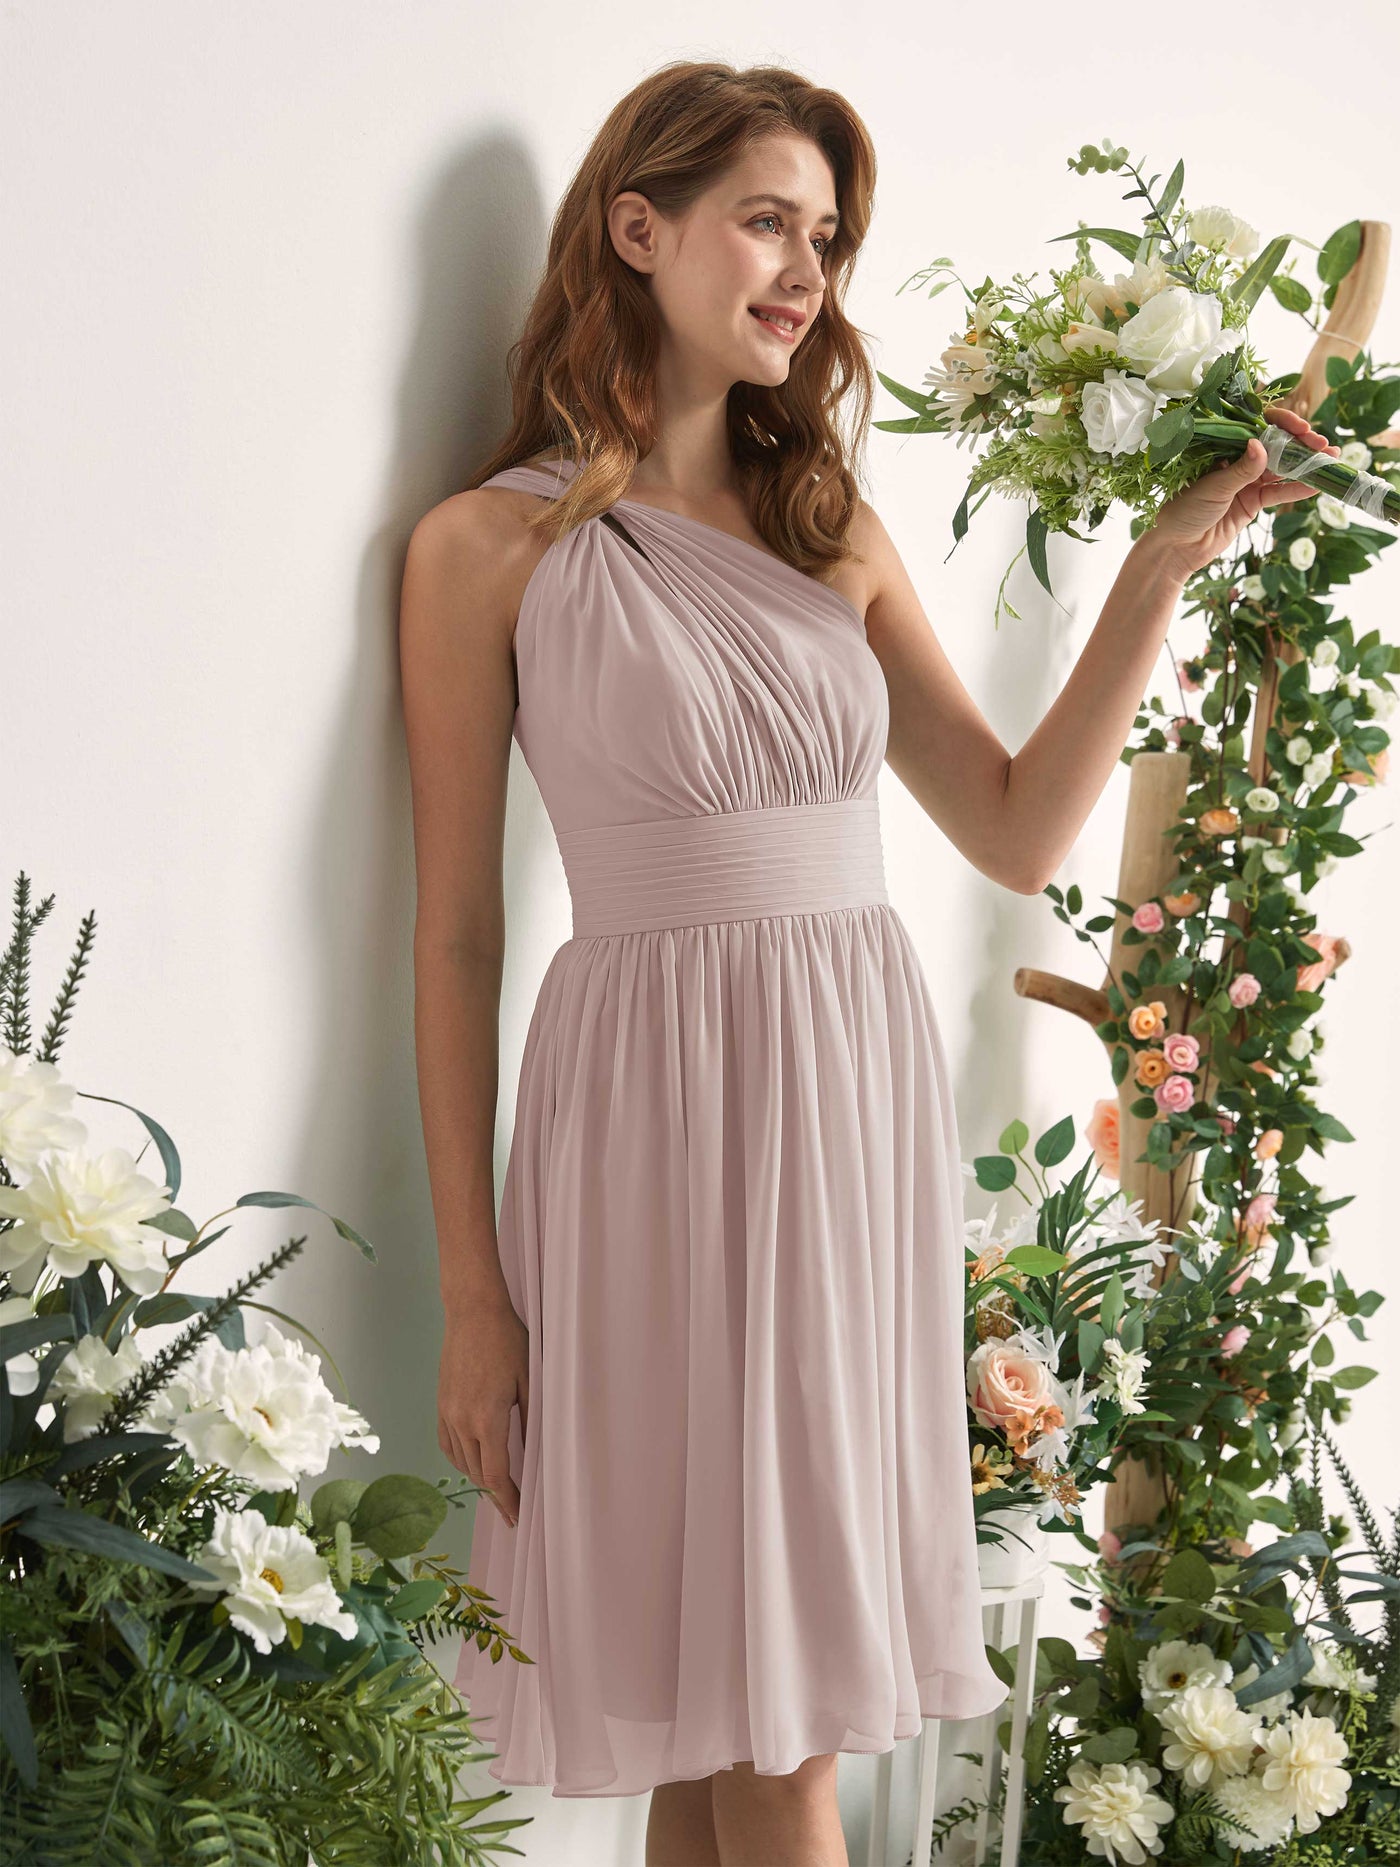 Bridesmaid Dress A-line Chiffon One Shoulder Knee Length Sleeveless Wedding Party Dress - Taupe (81221224)#color_taupe